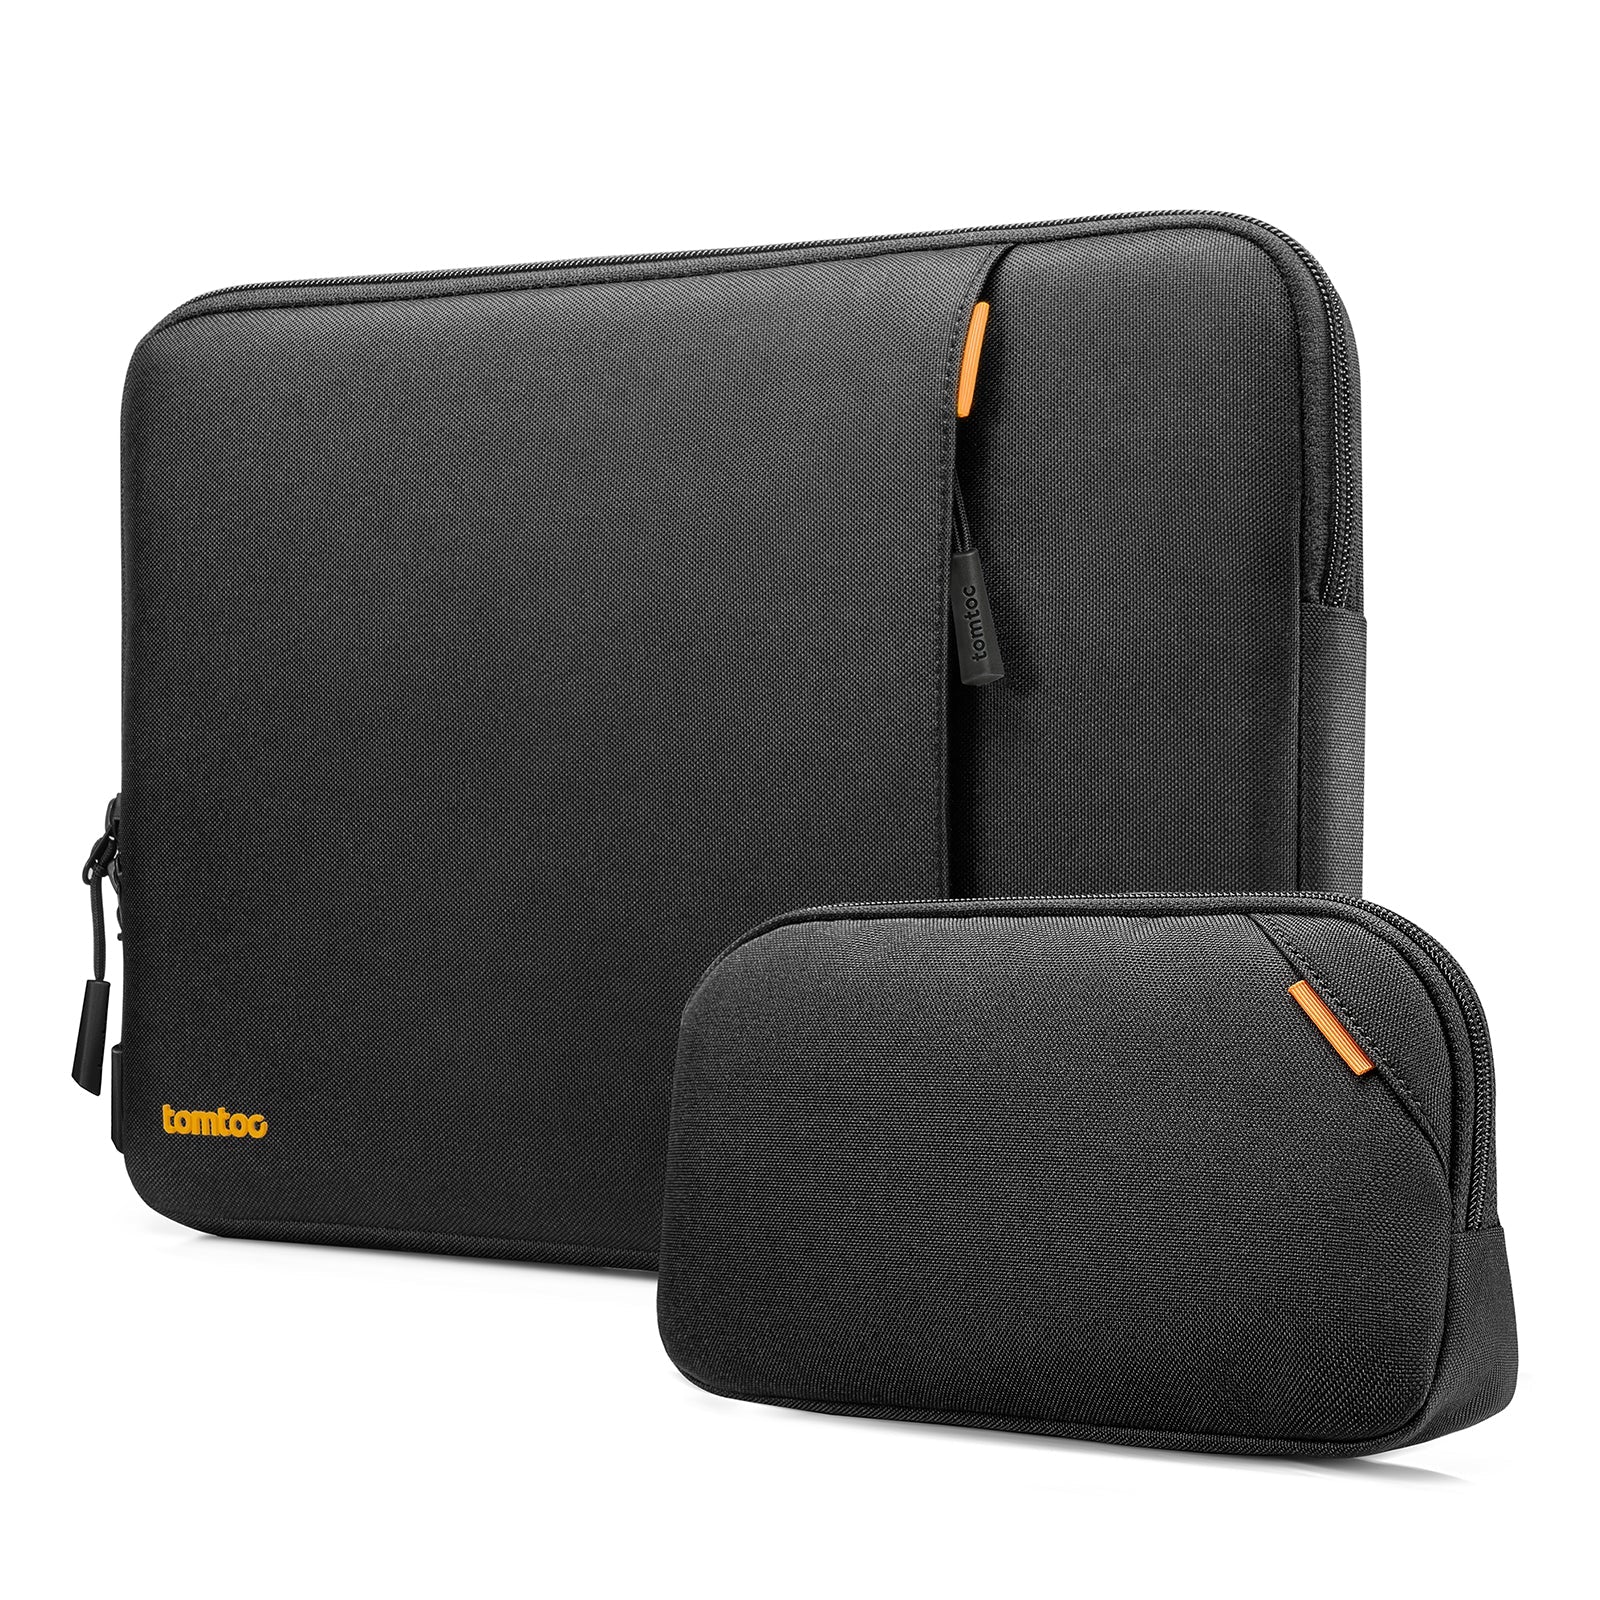 tomtoc 14 Inch Versatile 360 Protective Laptop Sleeve with Pouch - Black